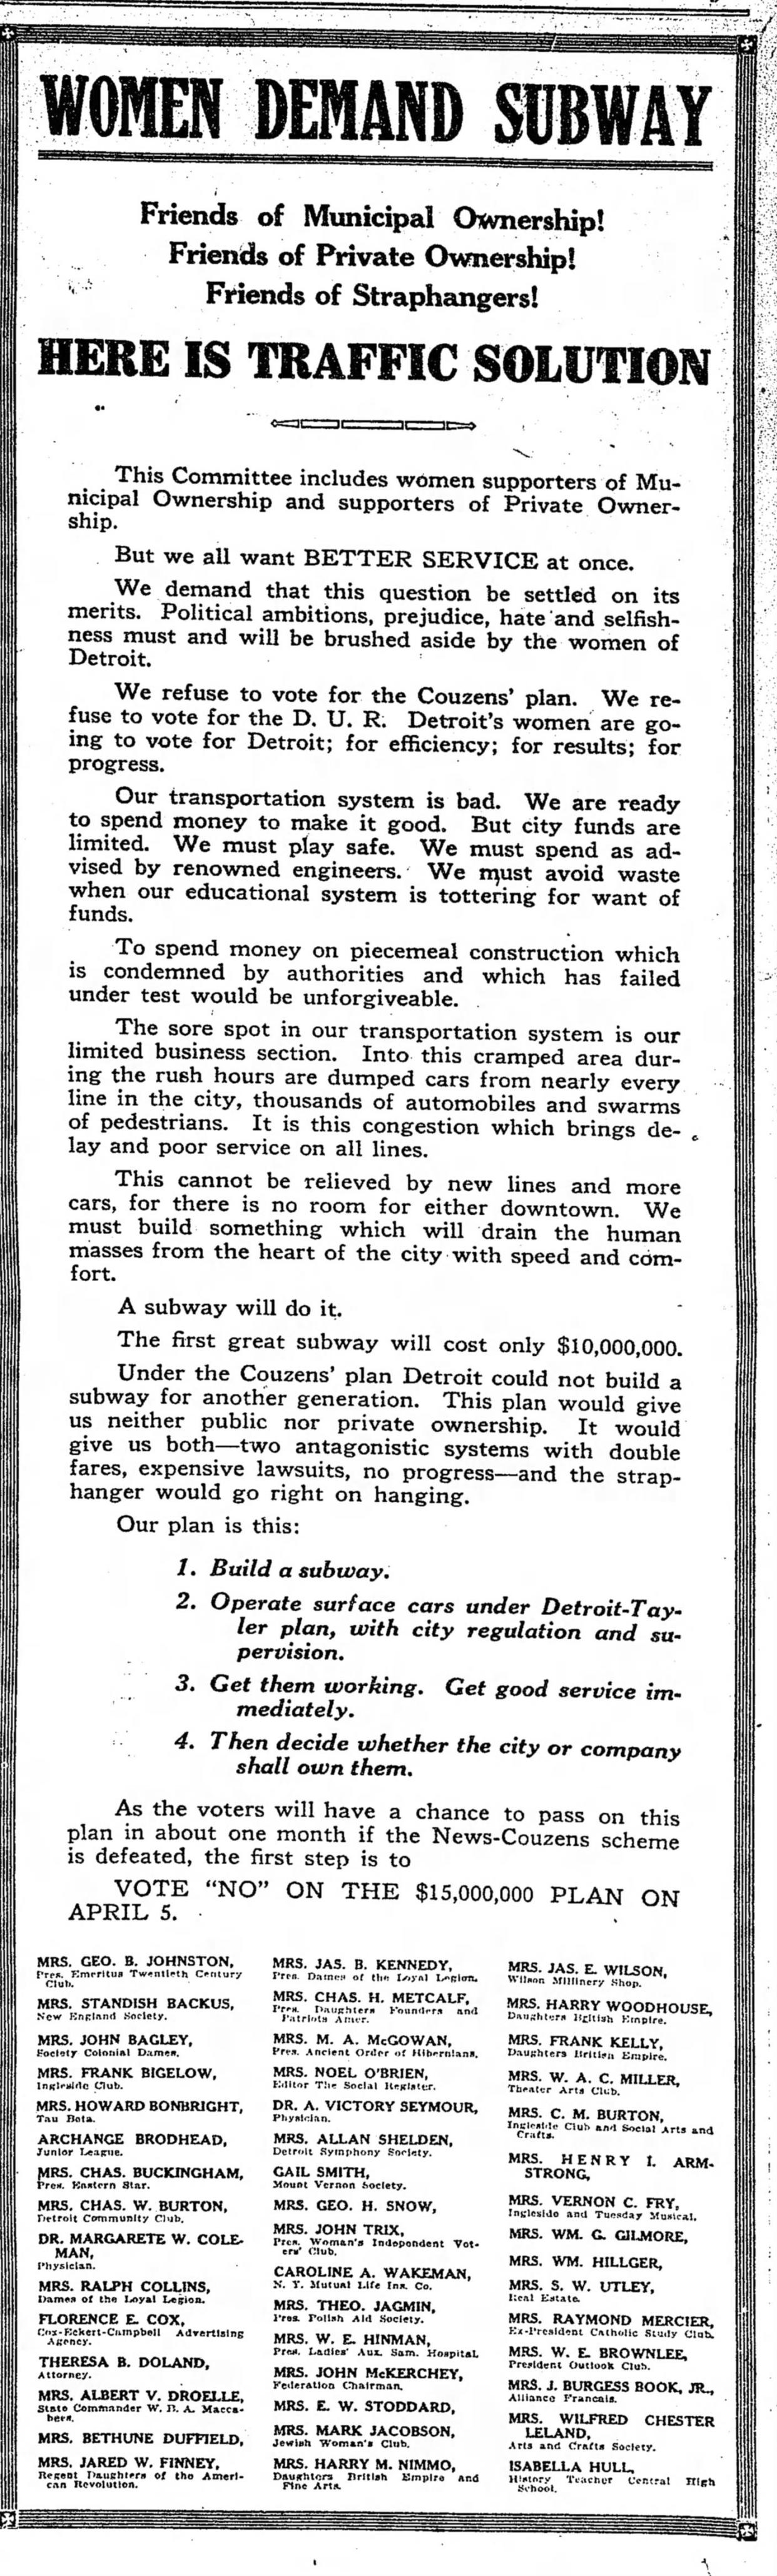 A 1920 ad in the Detroit Free Press